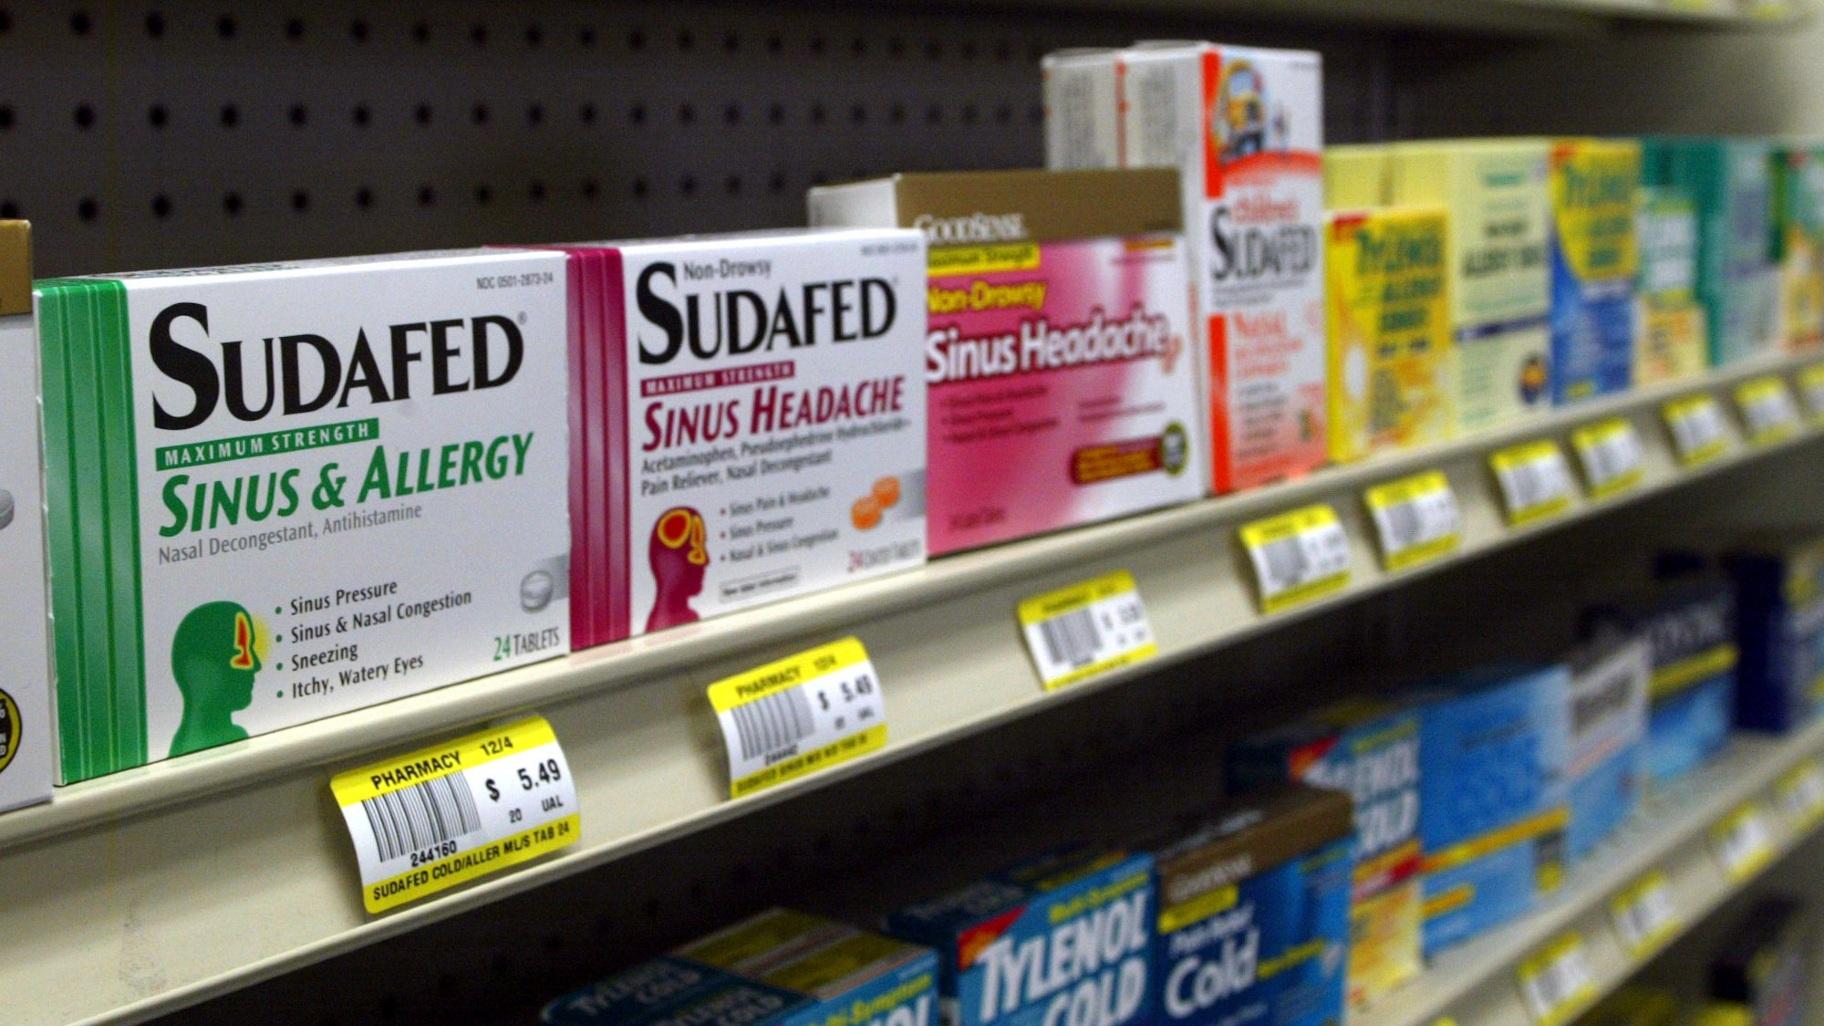 Popular Nasal Decongestant Doesn’t Actually Relieve Congestion, FDA Advisers Say